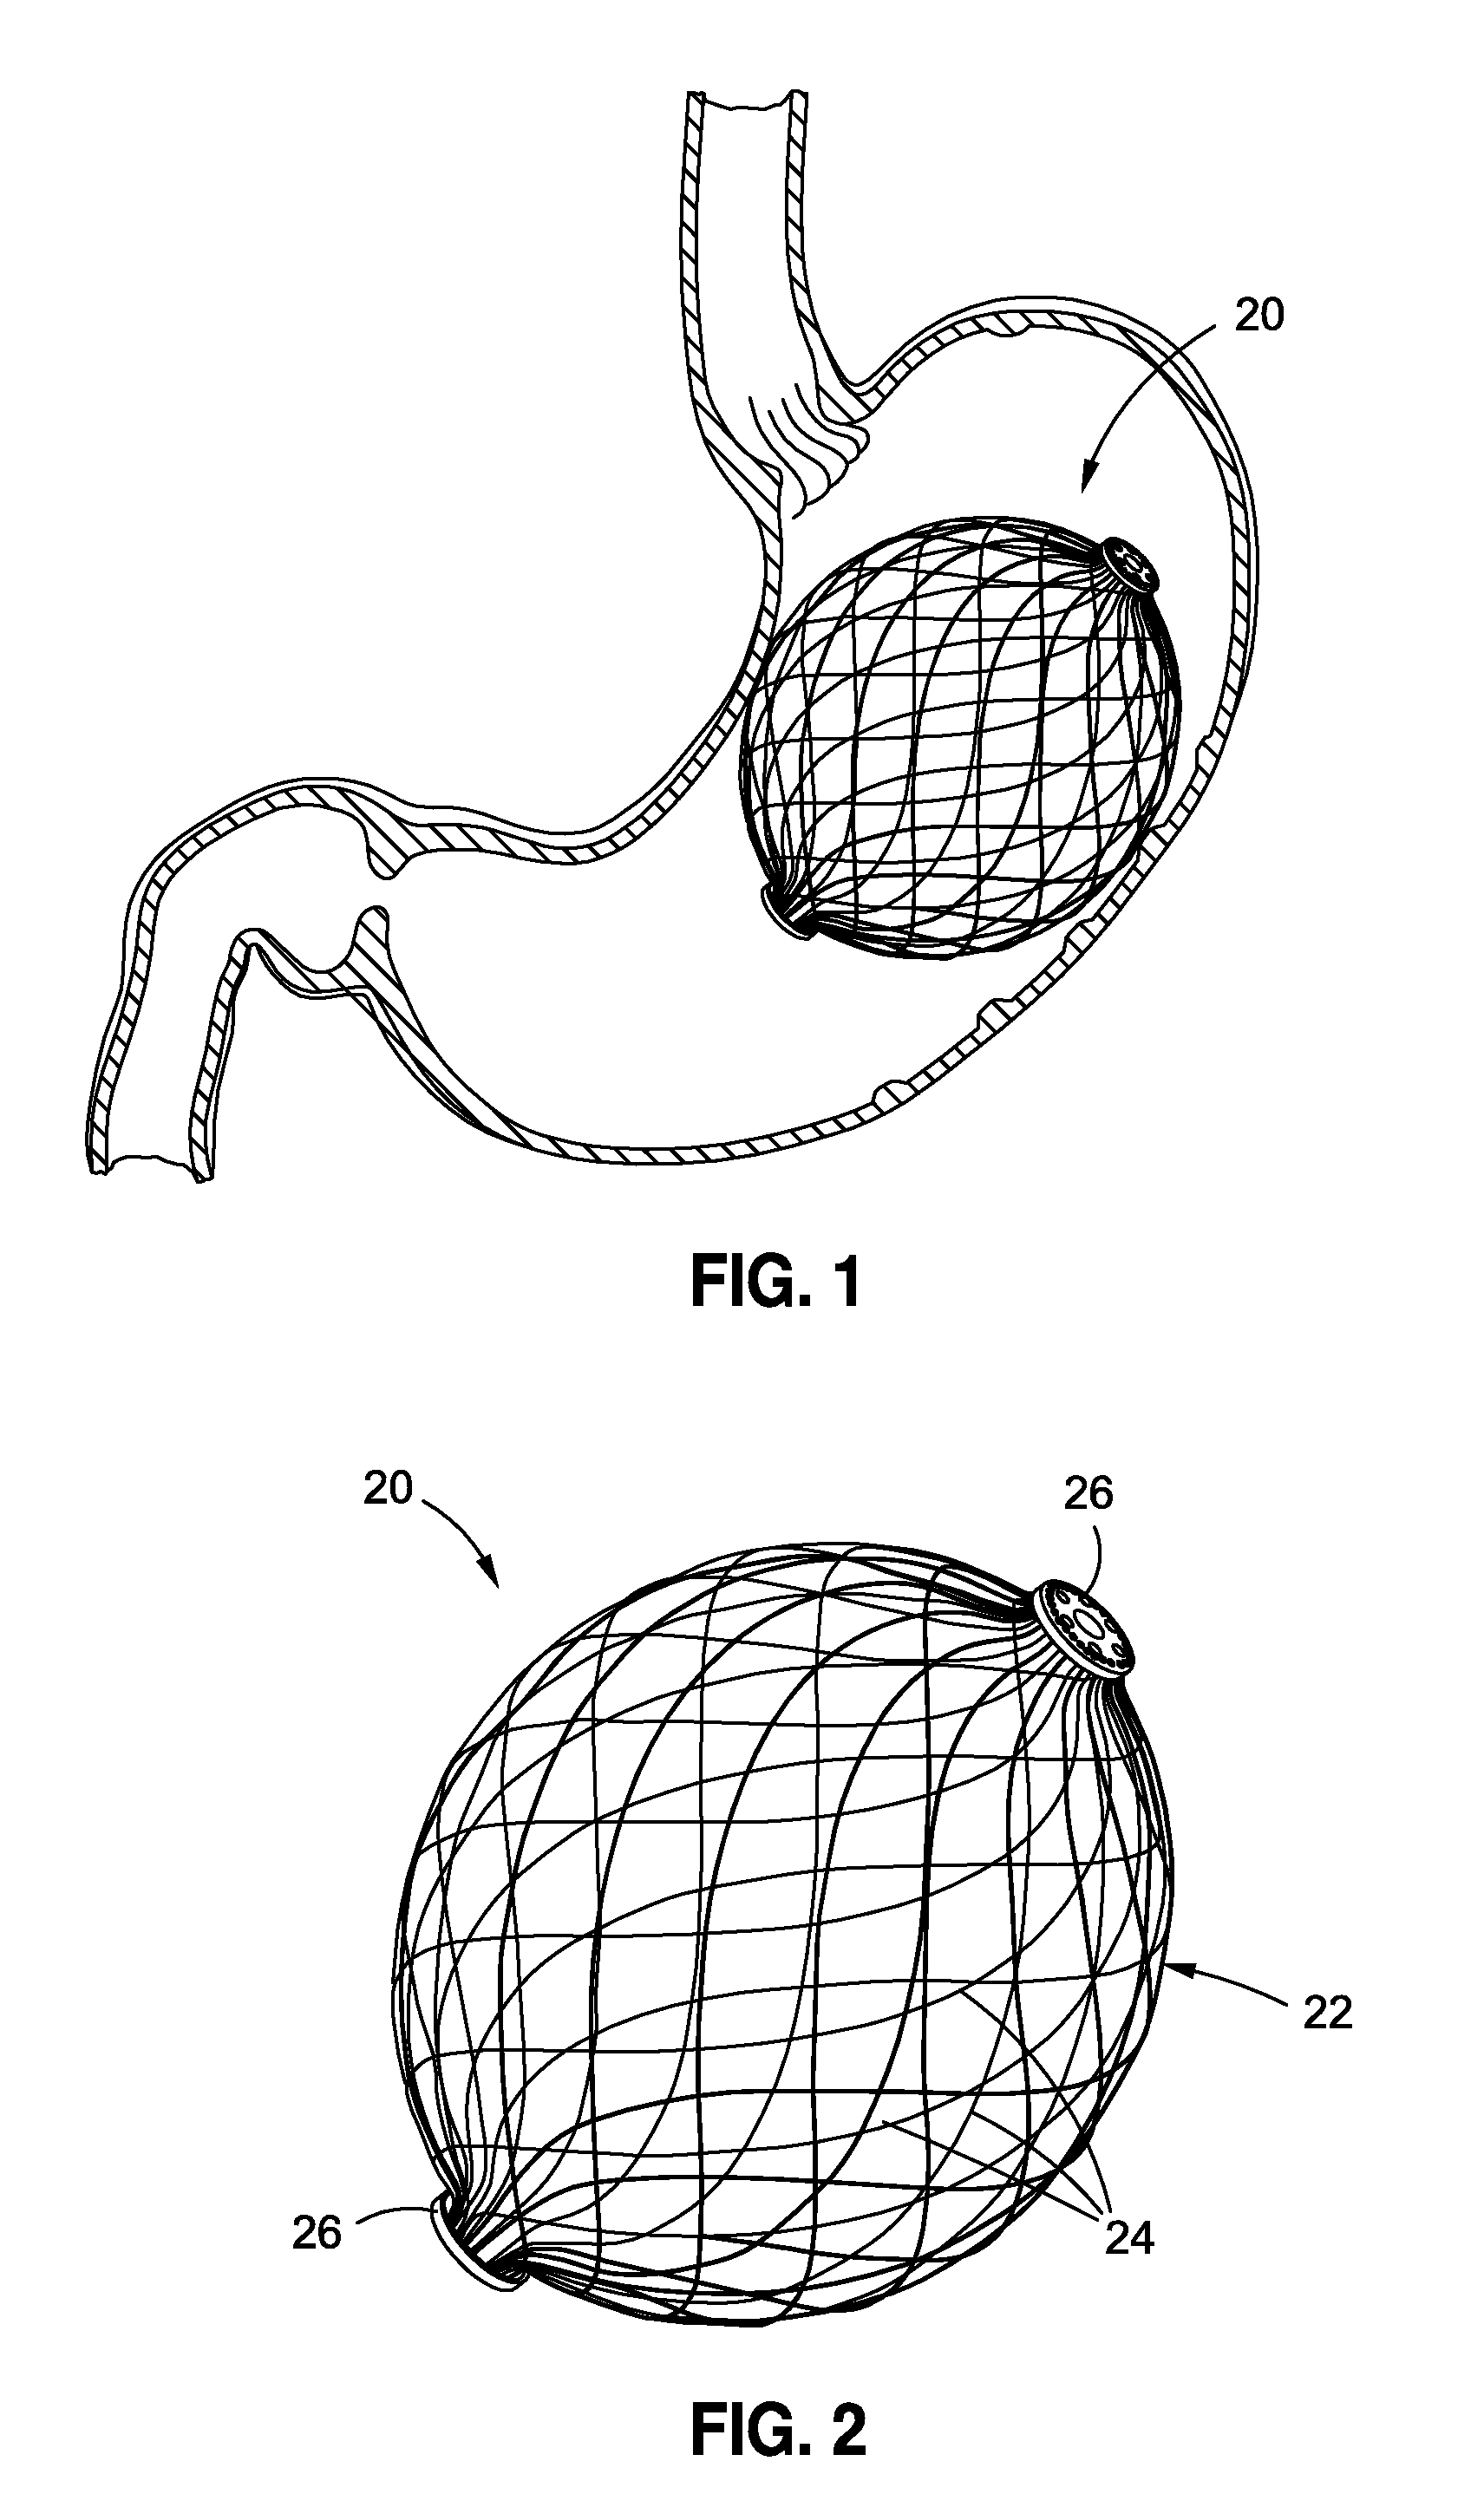 Intragastric implants with collapsible frames